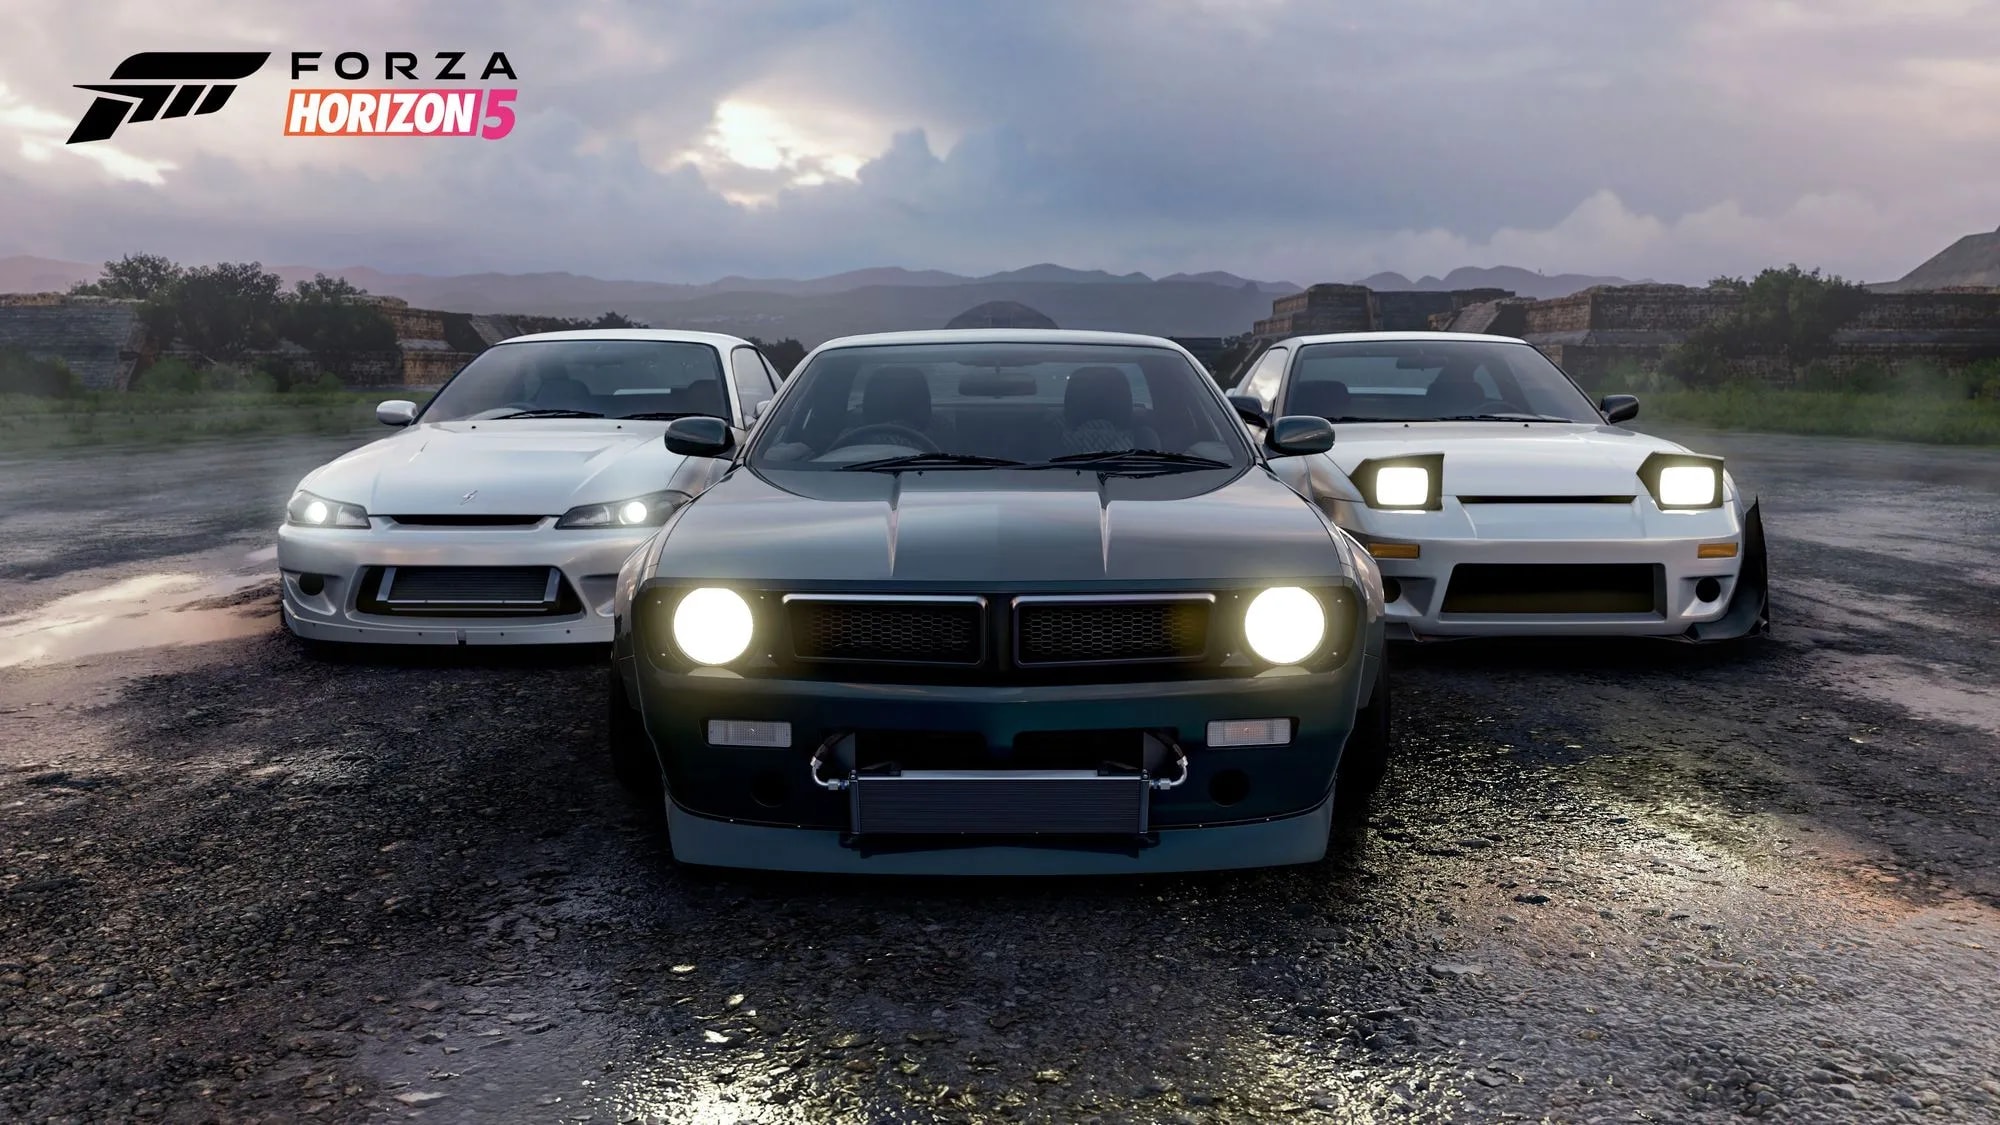 Forza Horizon 5 will get into muscle cars with the American